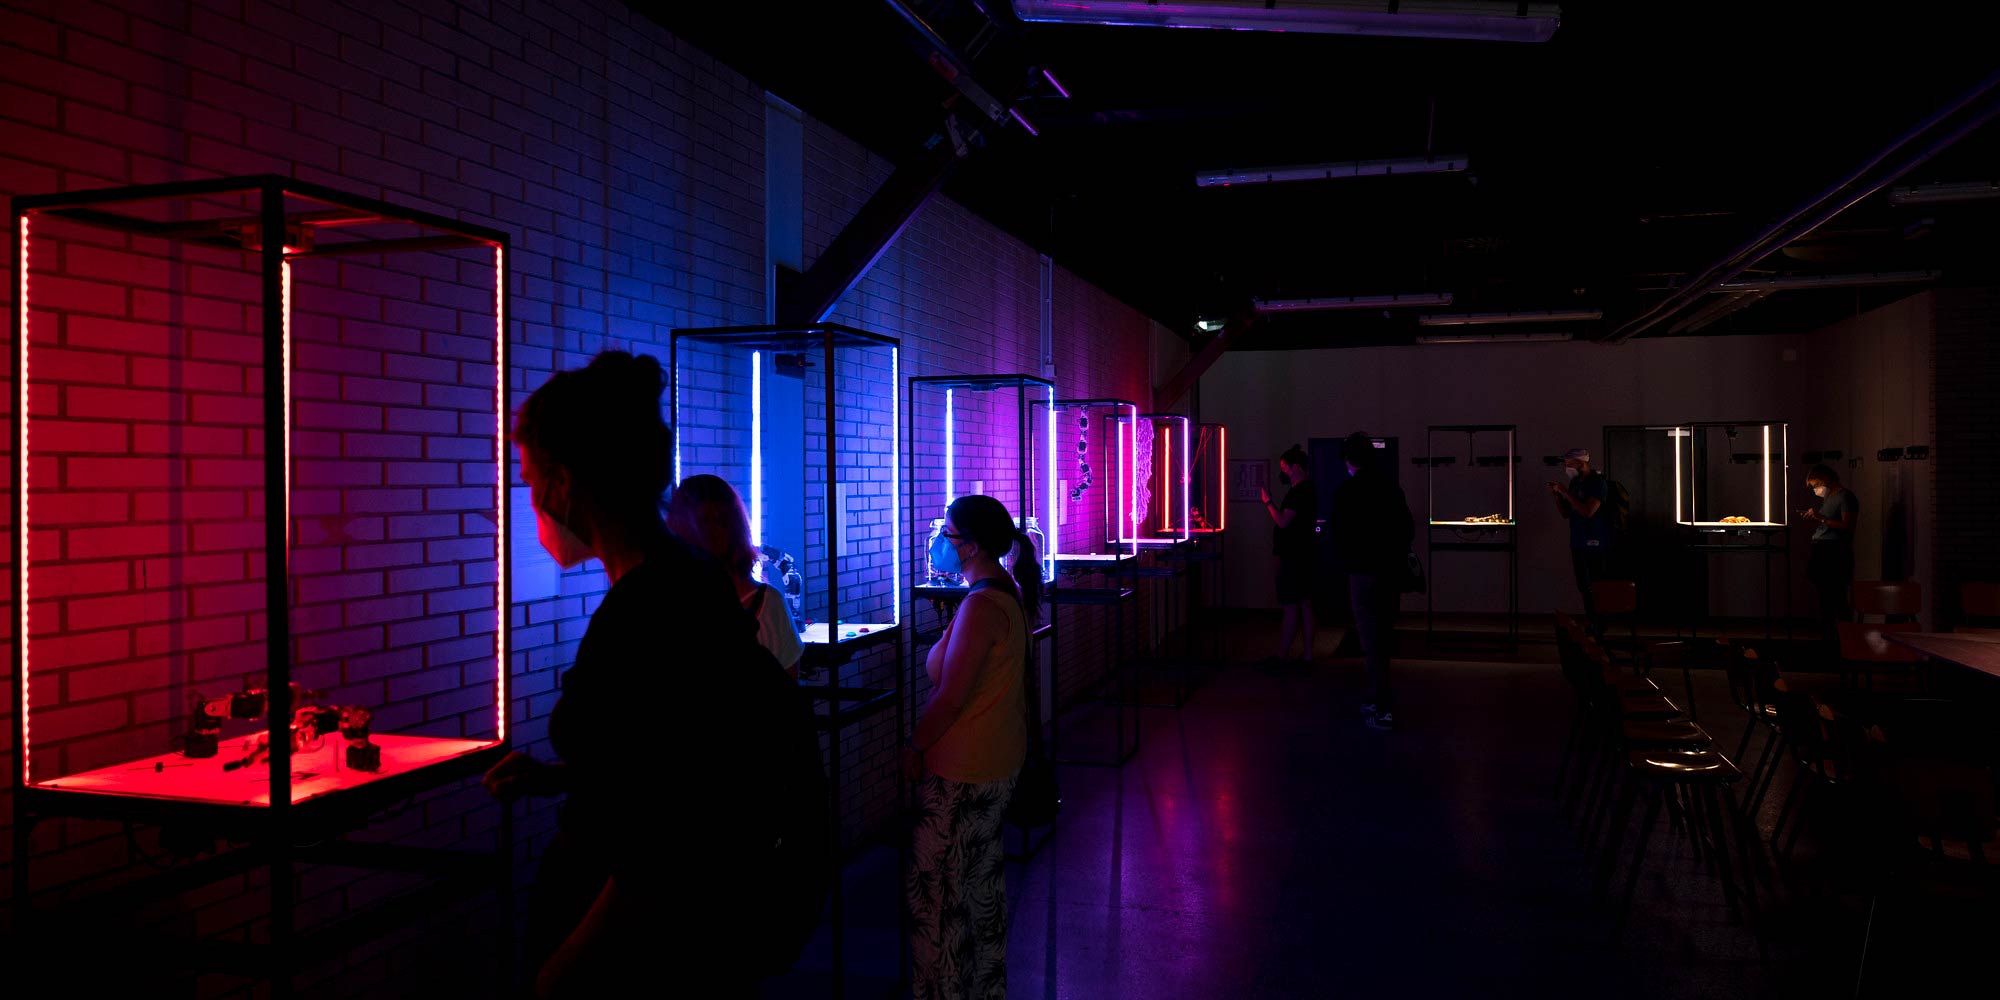 <strong>2021:</strong> The Ars Electronica Festival presents itself as a dual event - with exhibitions, concerts, talks, conferences, workshops, guided tours and other online activites.